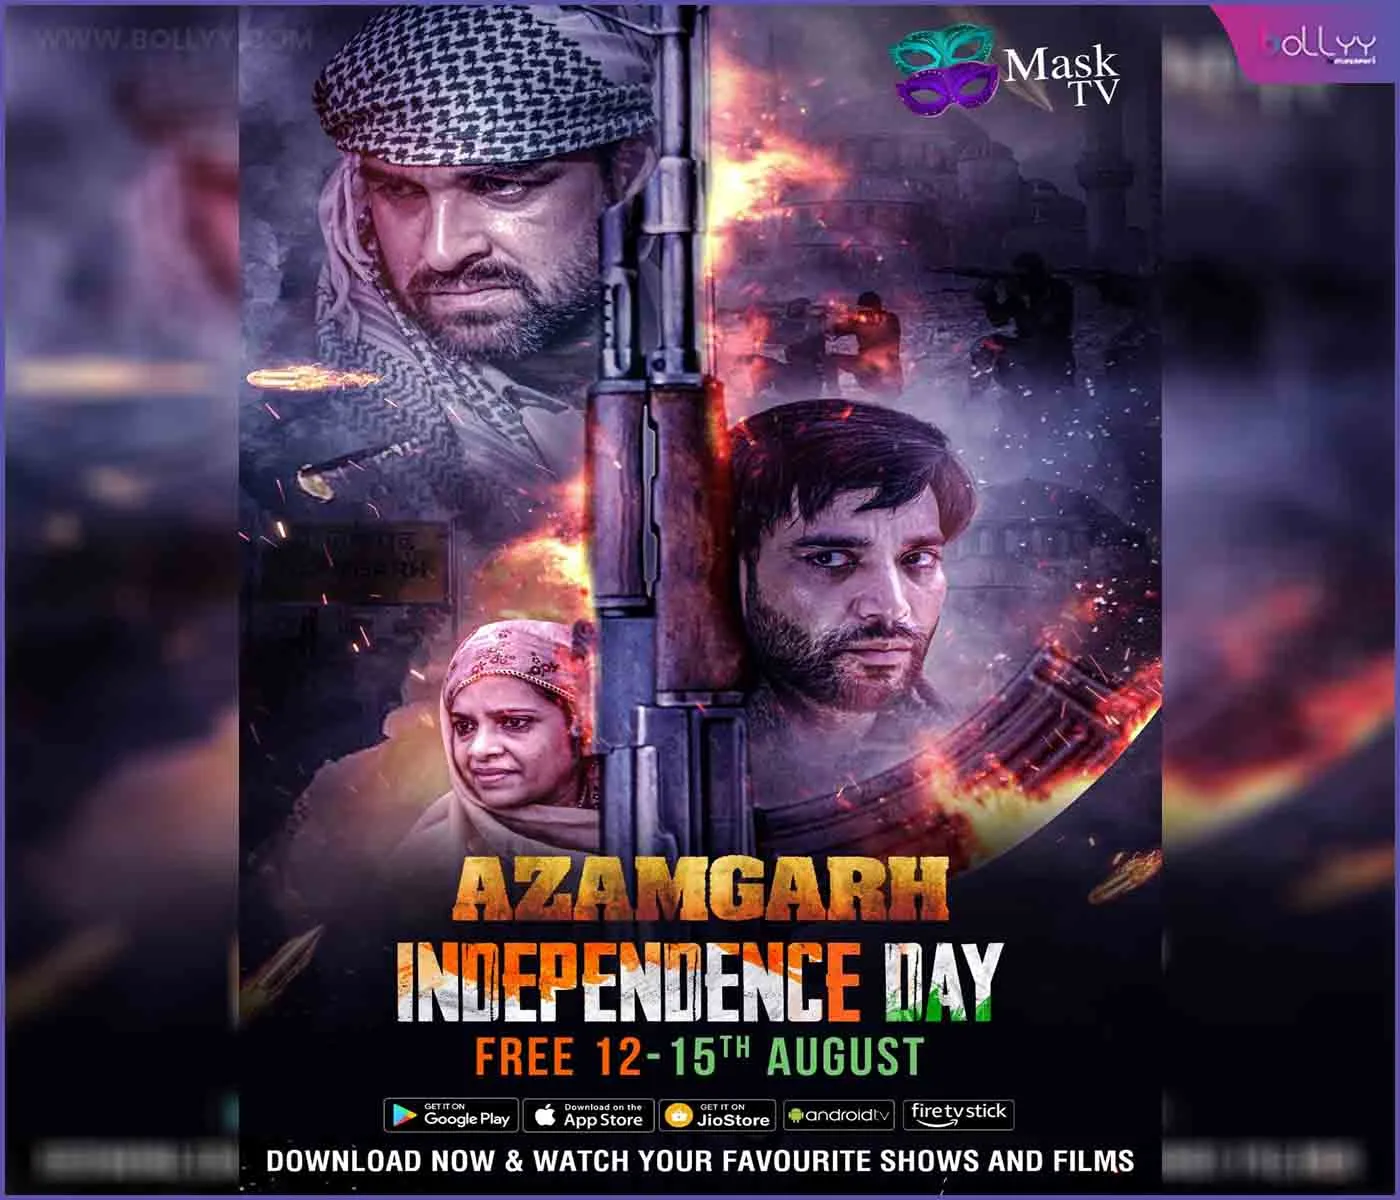 Pankaj Tripathi’s First Release Of The Year On Mask Tv For Free